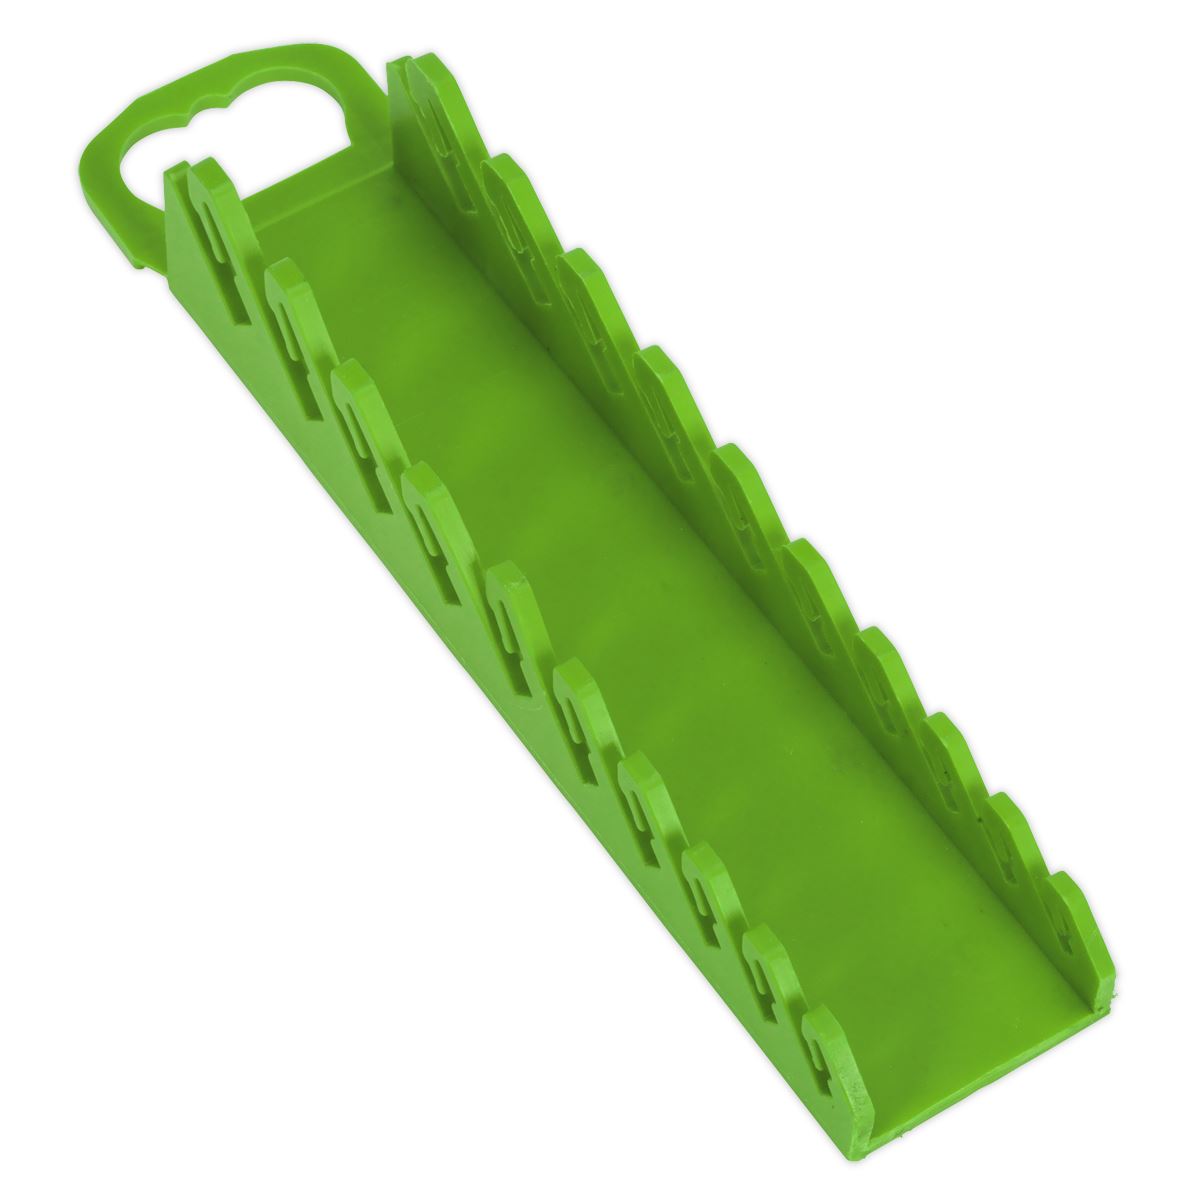 Sealey Premier High Visibility Green Stubby Spanner Rack 10 Capacity Hanging Toolbox